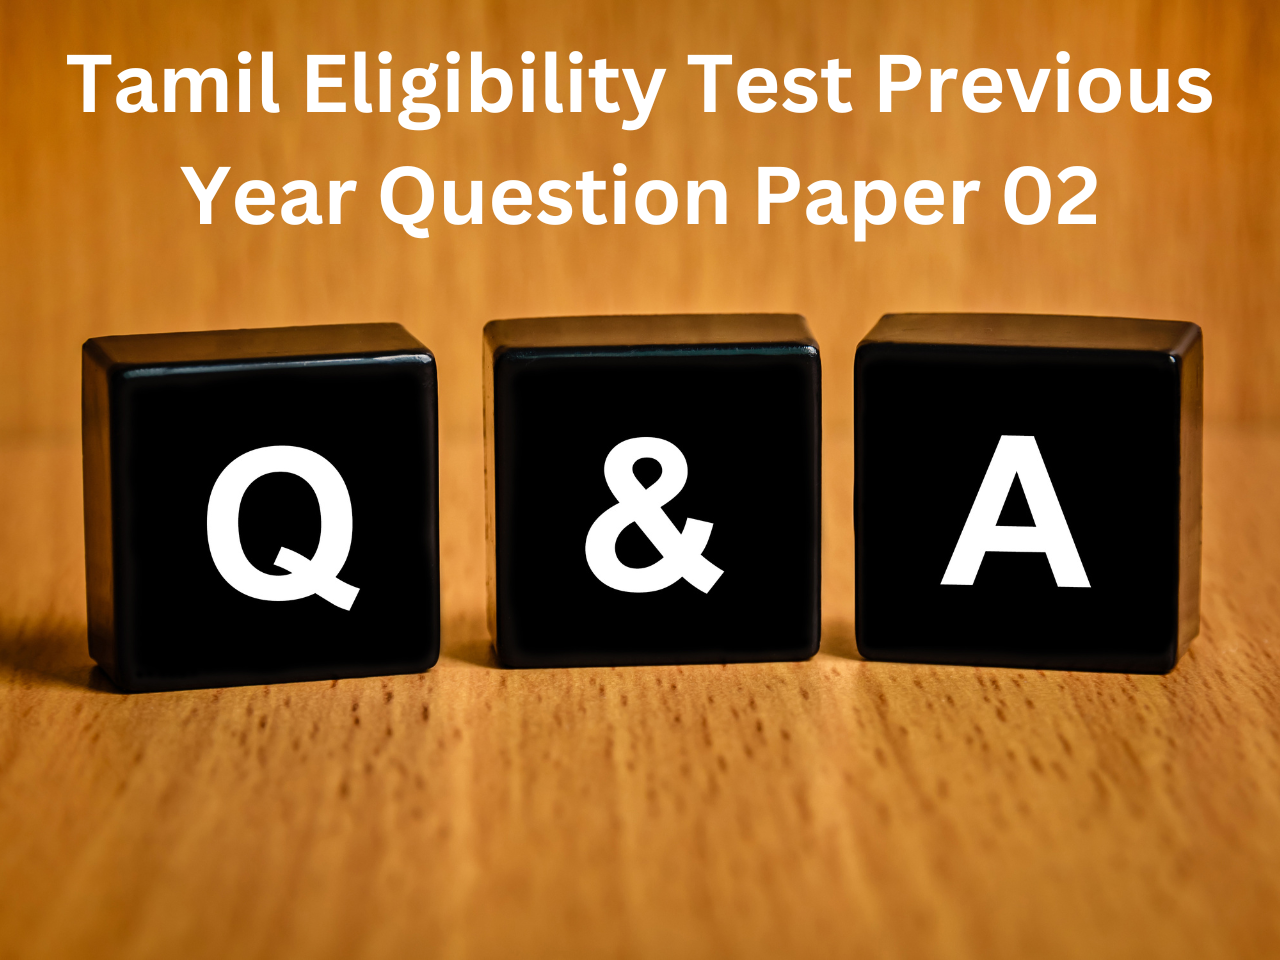 Tamil Eligibility Test Previous Year Question Paper